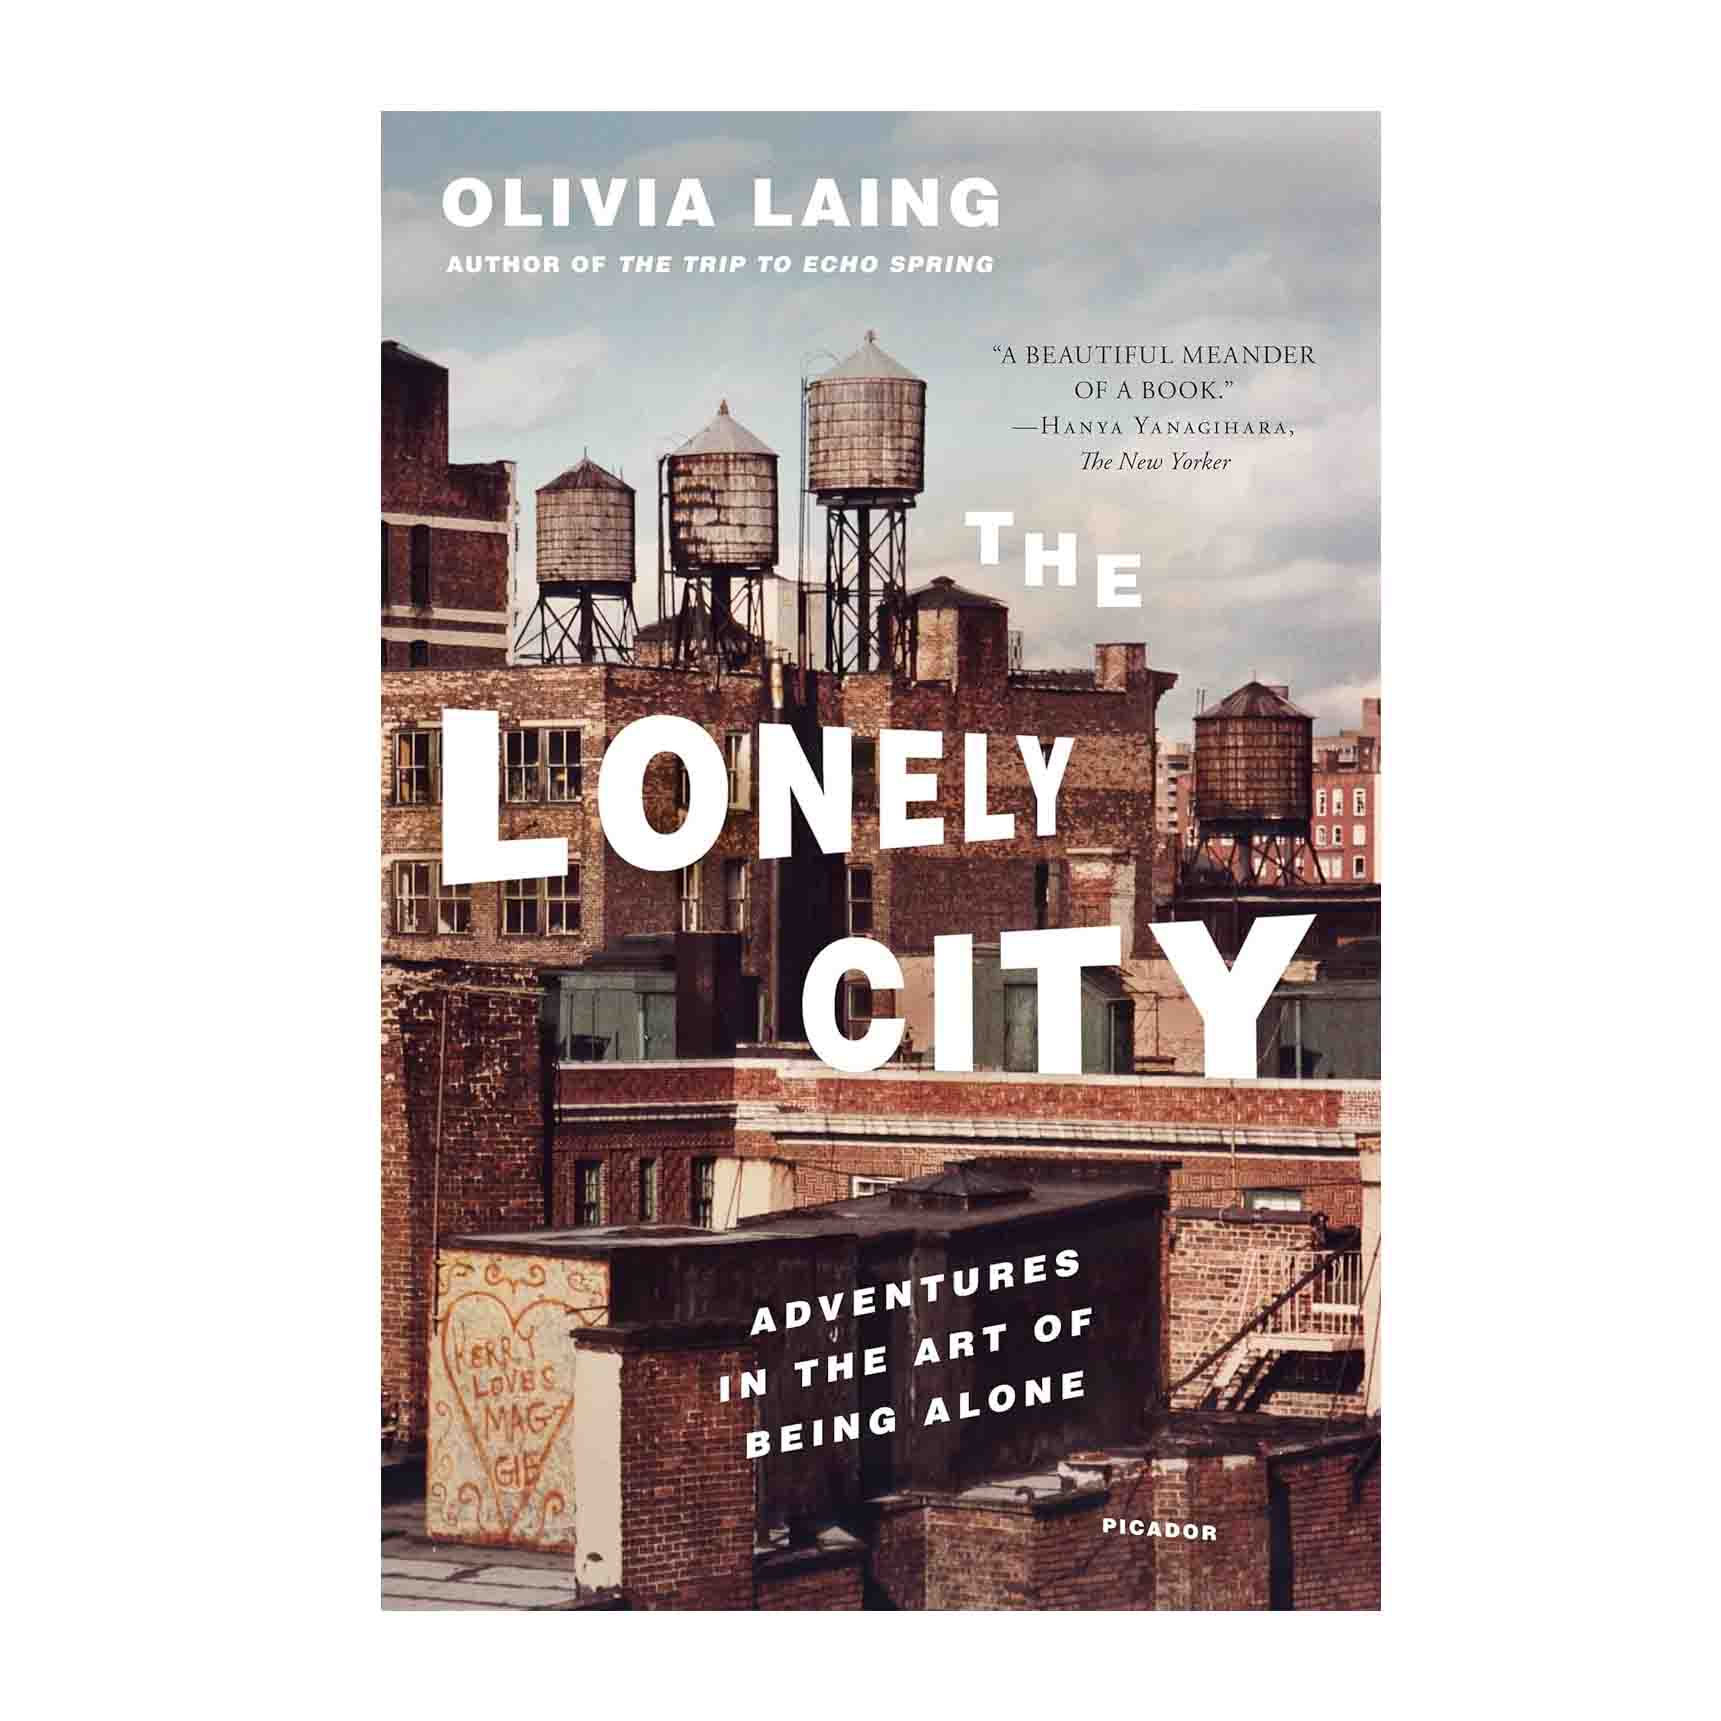 book titled The Lonely City: Adventures in the Art of Being Alone by Olivia Laing